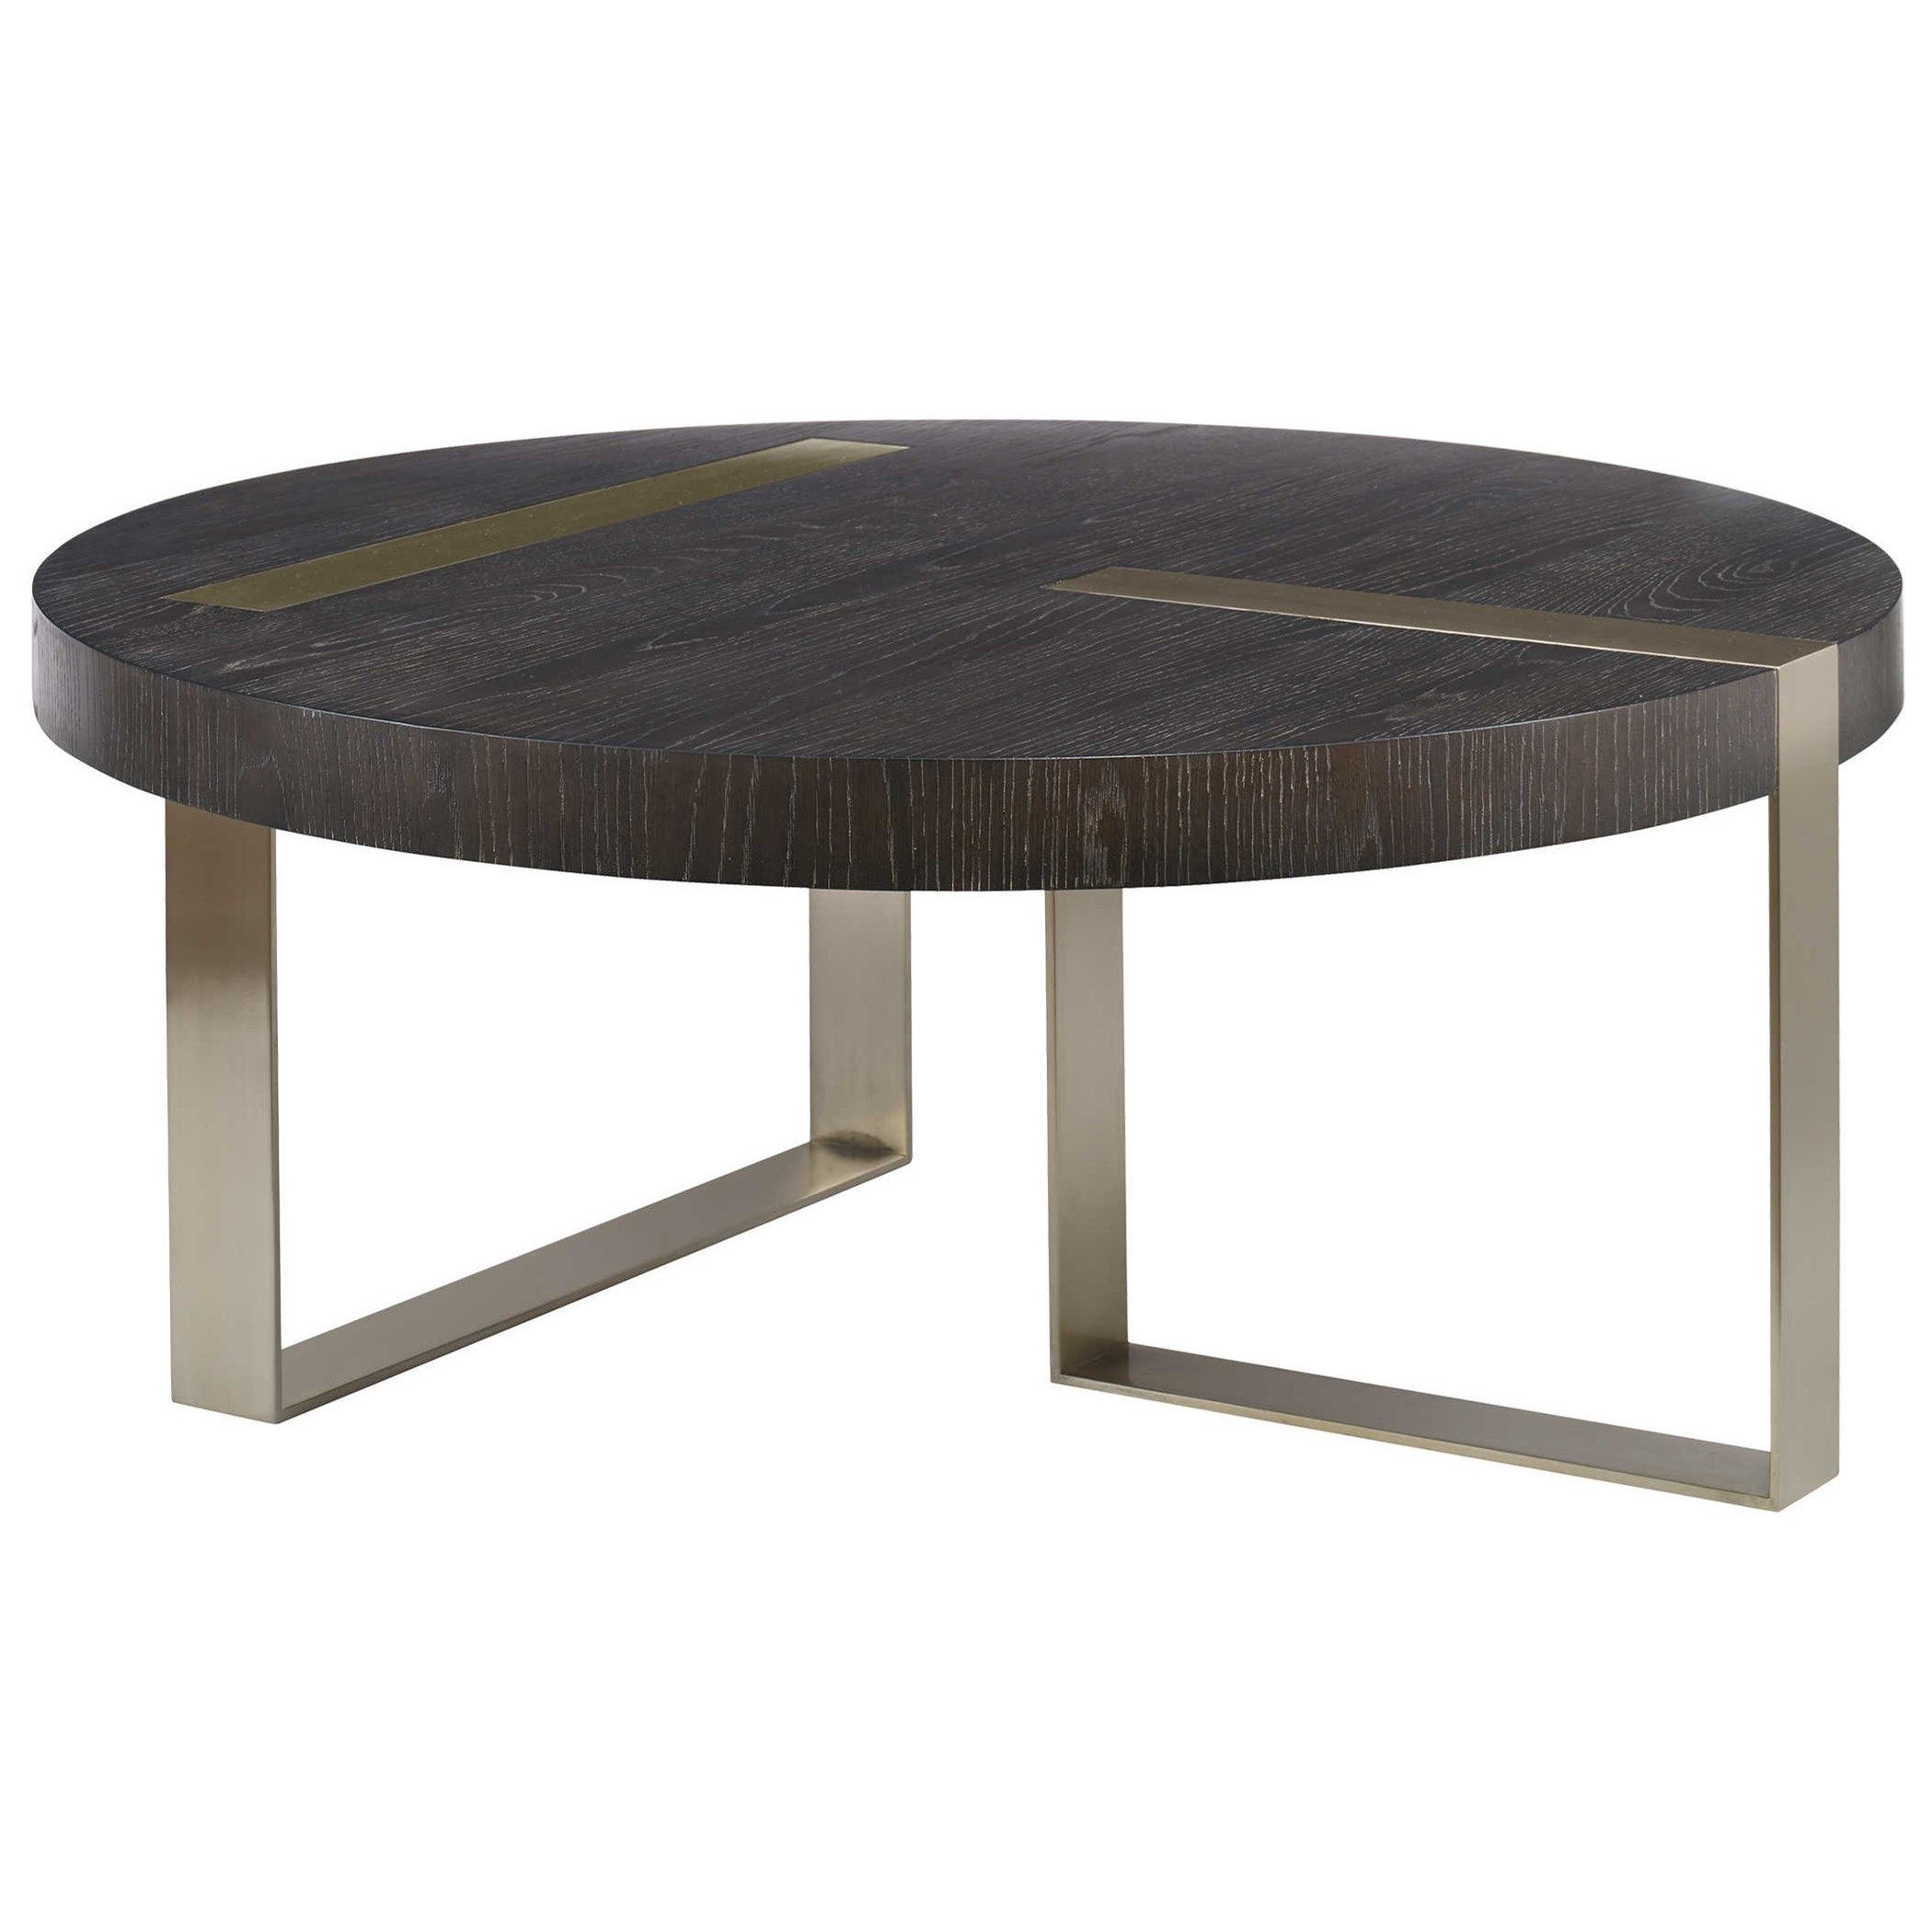 Uttermost Accent Furniture – Occasional Tables Converge Round Coffee Within Occasional Coffee Tables (View 5 of 20)